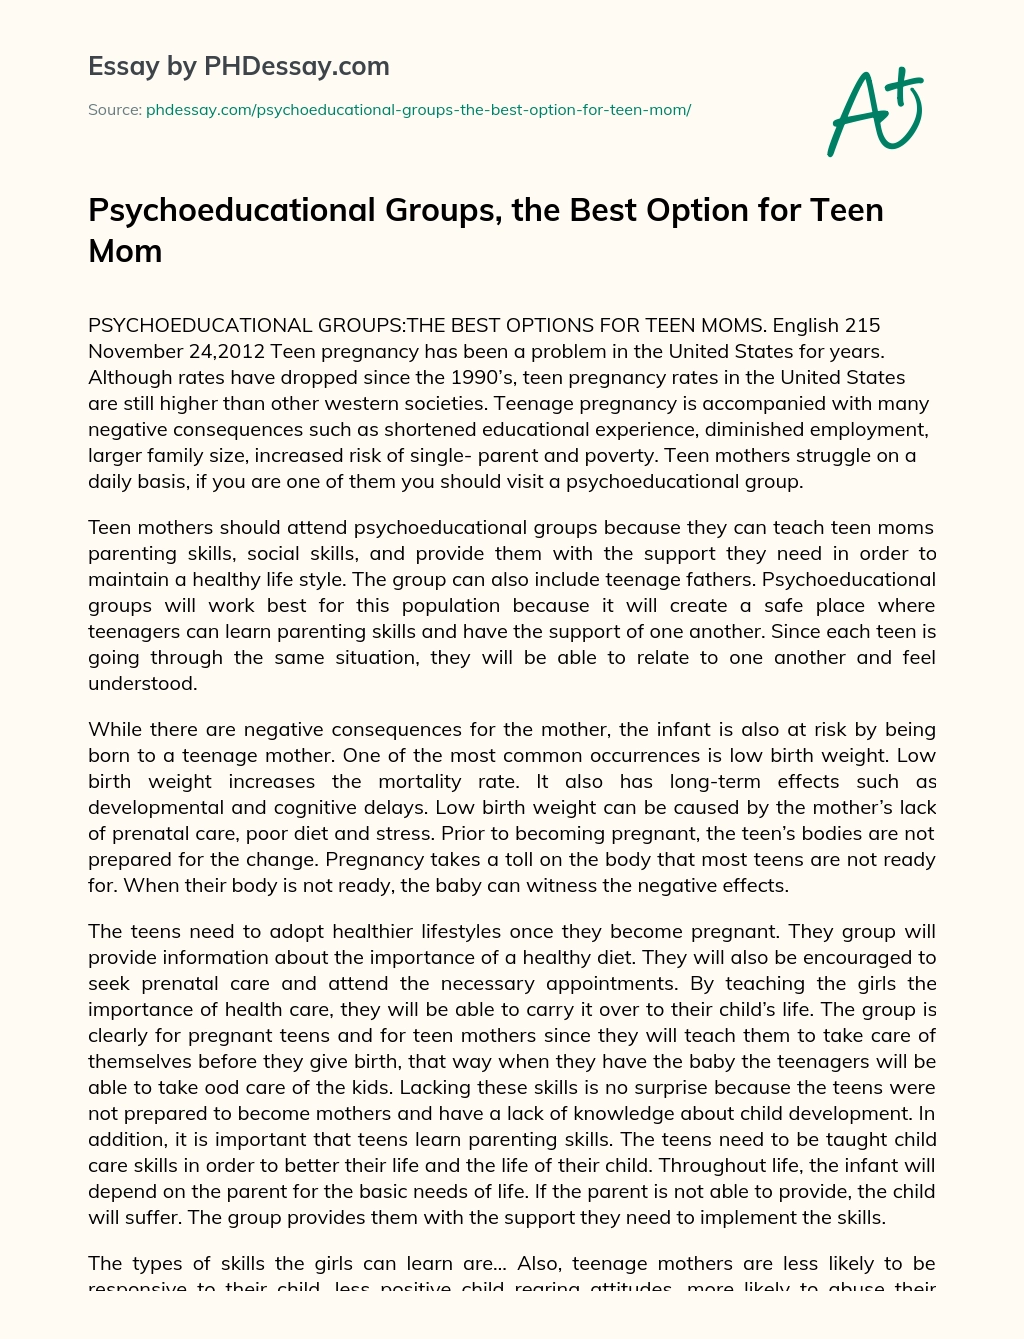 Psychoeducational Groups, the Best Option for Teen Mom essay